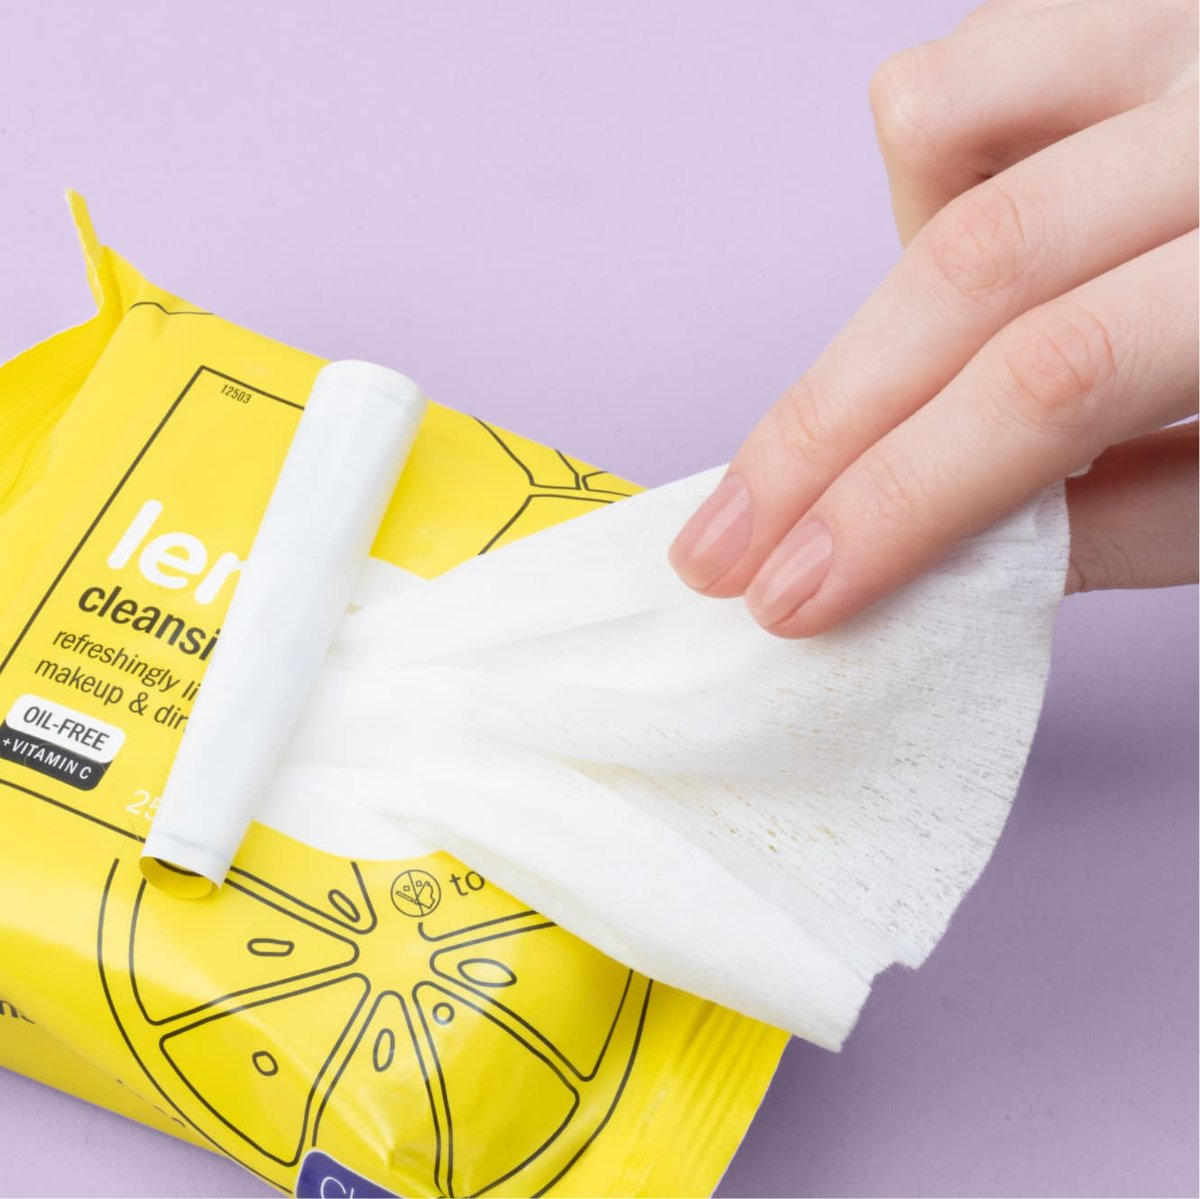 White wipe being pulled out of lemon cleansing wipes in a yellow packaging in front of a light purple background